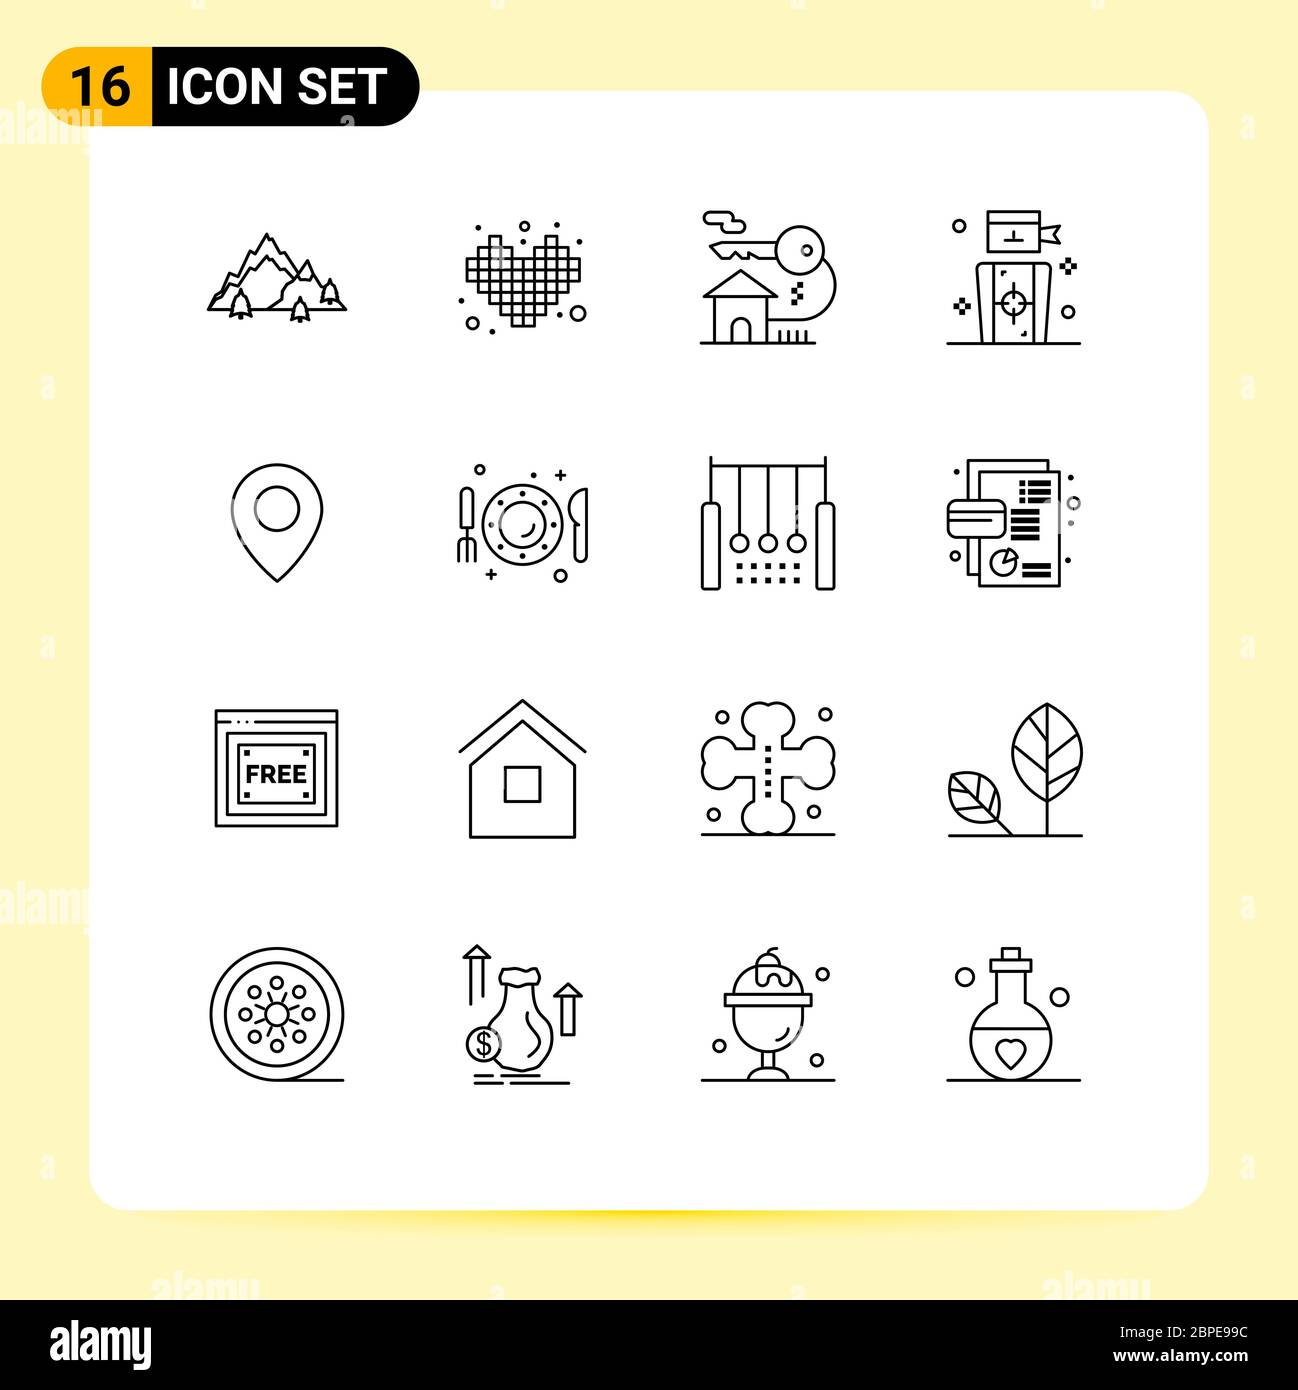 Universal Icon Symbols Group of 16 Modern Outlines of twitter, people, tetris, goal, key Editable Vector Design Elements Stock Vector